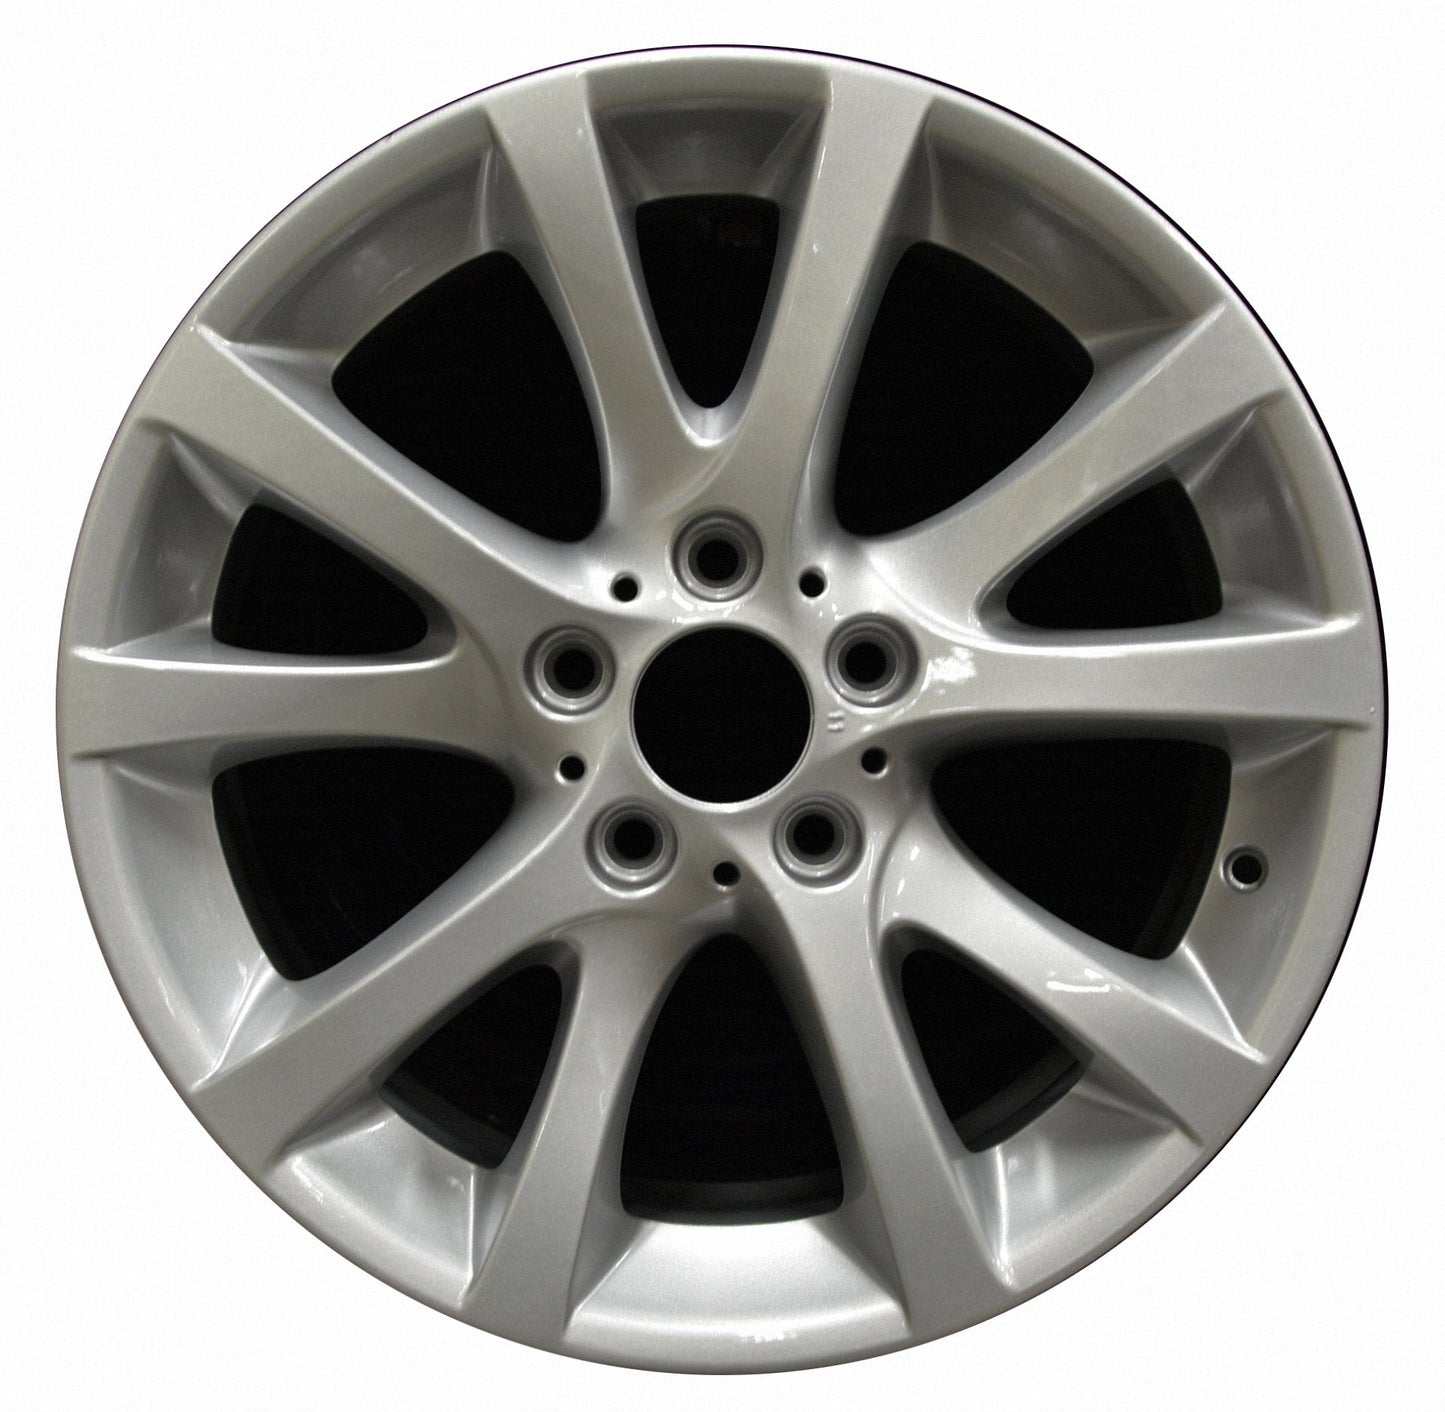 BMW 135i  2008, 2009, 2010, 2011, 2012, 2013 Factory OEM Car Wheel Size 18x8.5 Alloy WAO.71508RE.PS10.FF